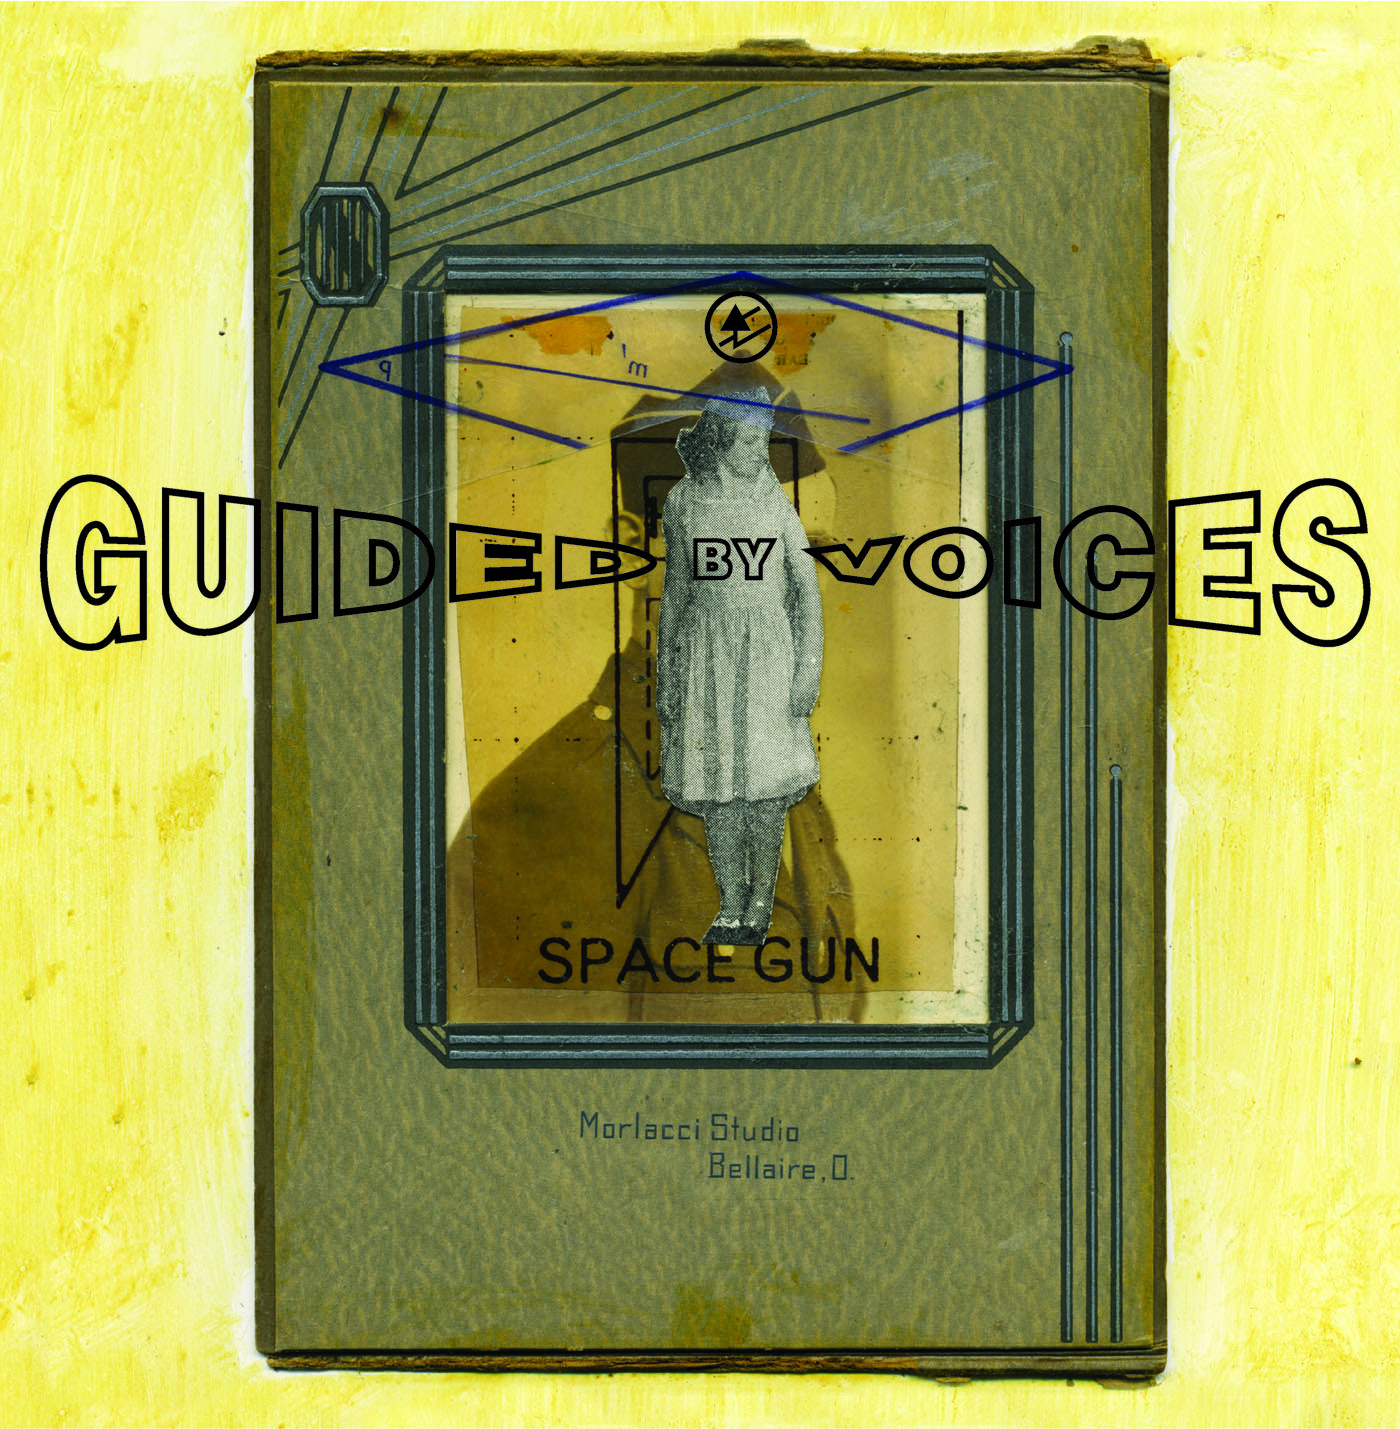 Guided By Voices Announce New Album <i></noscript>Space Gun</i>, Share Title Track” title=”Print” data-original-id=”269480″ data-adjusted-id=”269480″ class=”sm_size_full_width sm_alignment_center ” data-image-source=”getty” />
<p><strong><i>Space Gun</i> Tracklist:</strong><br />
01. Space Gun<br />
02. Colonel Paper<br />
03. King Flute<br />
04. Ark Technican<br />
05. See My Field<br />
06. Liar’s Box<br />
07. Blink Bank<br />
08. Daily Get Ups<br />
09. Hudson Rake<br />
10. Sport Component National<br />
11. I Love Kangaroos<br />
12. Grey Spat Matters<br />
13. That’s Good<br />
14. Flight Advantage<br />
15. Evolution Circus</p>
</div>
</div>
</div>
</div>
</div>
</section>
<section data-particle_enable=